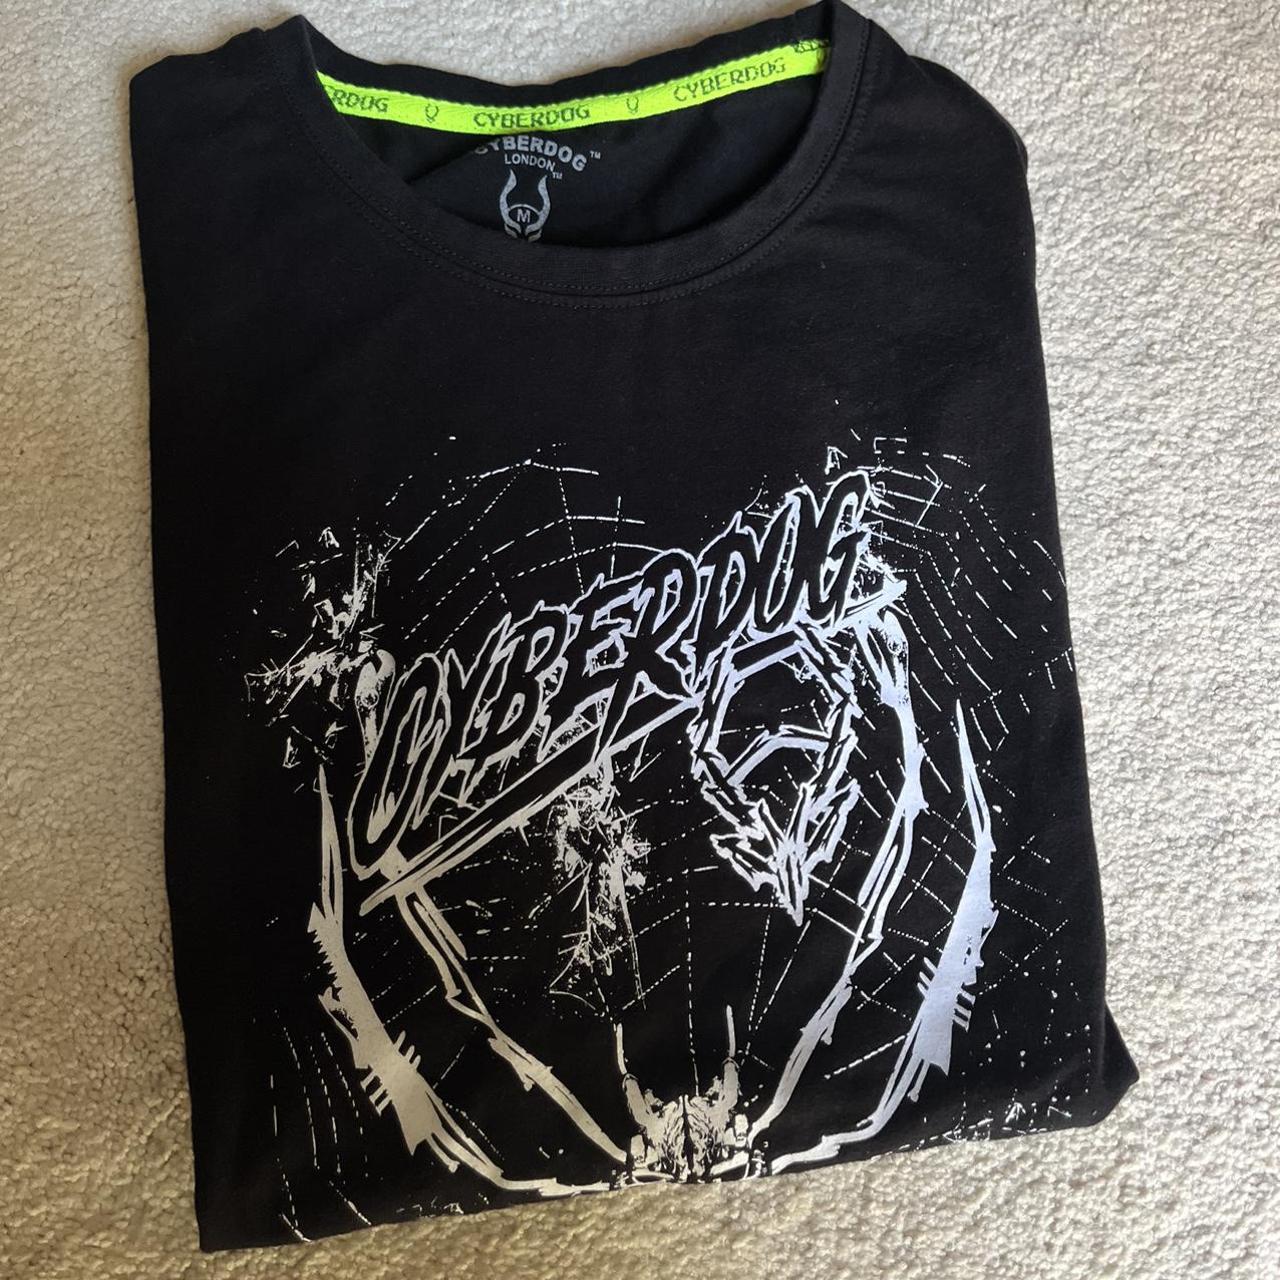 Never worn early 00s Cyberdog tee shirt. I bought... - Depop